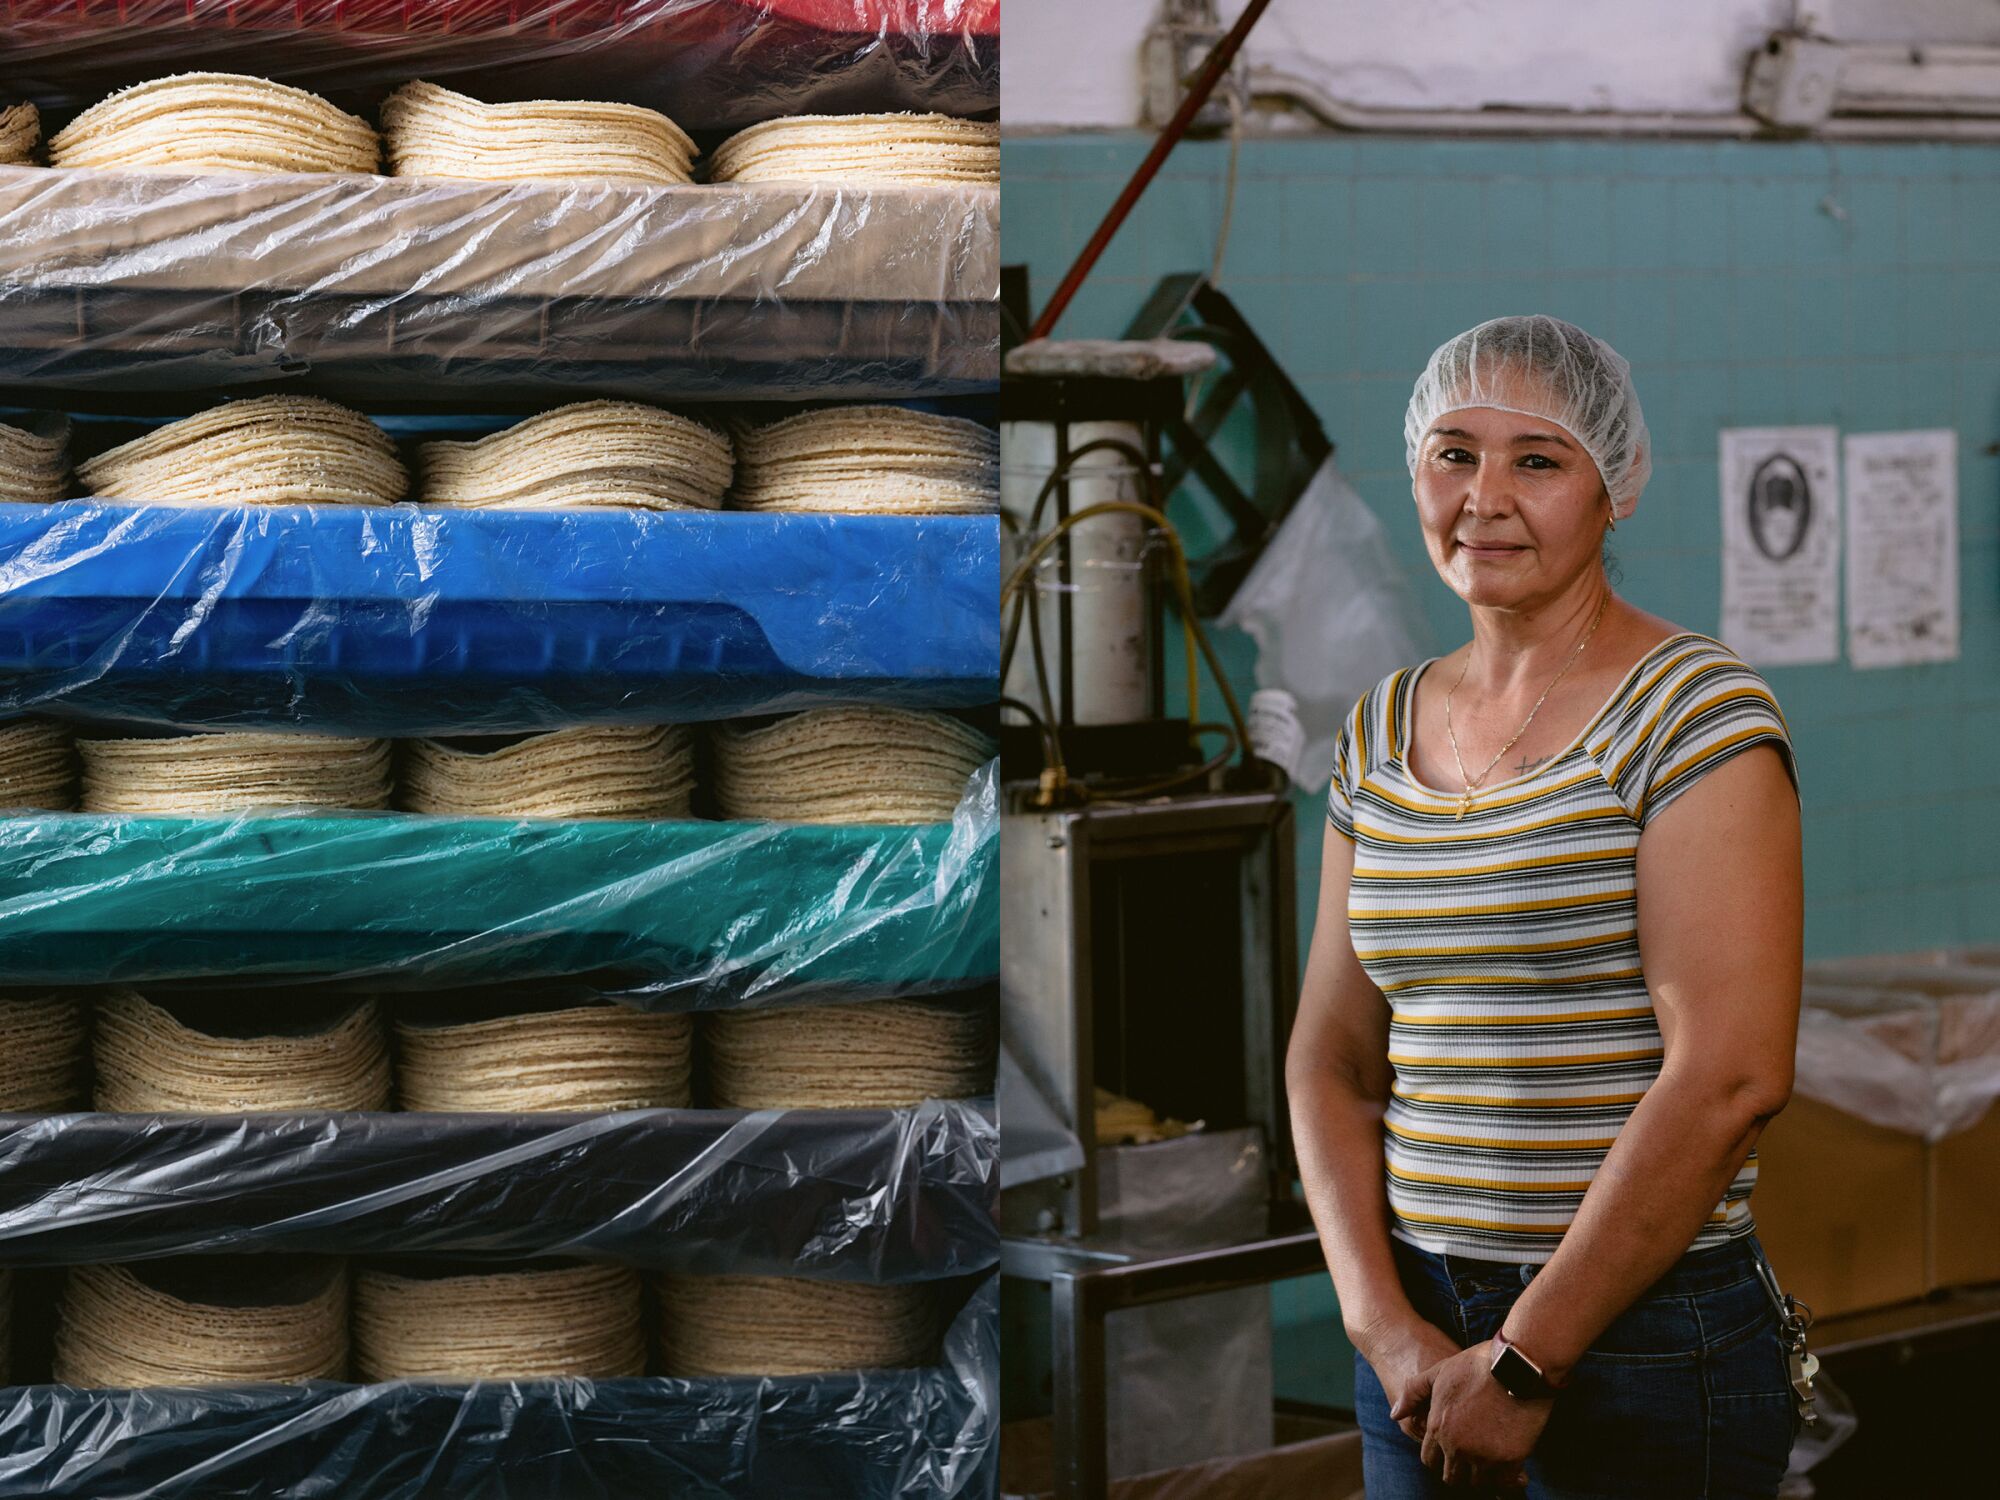 Two images side by side of stacked tortillas, left, and a portrait of a woman.